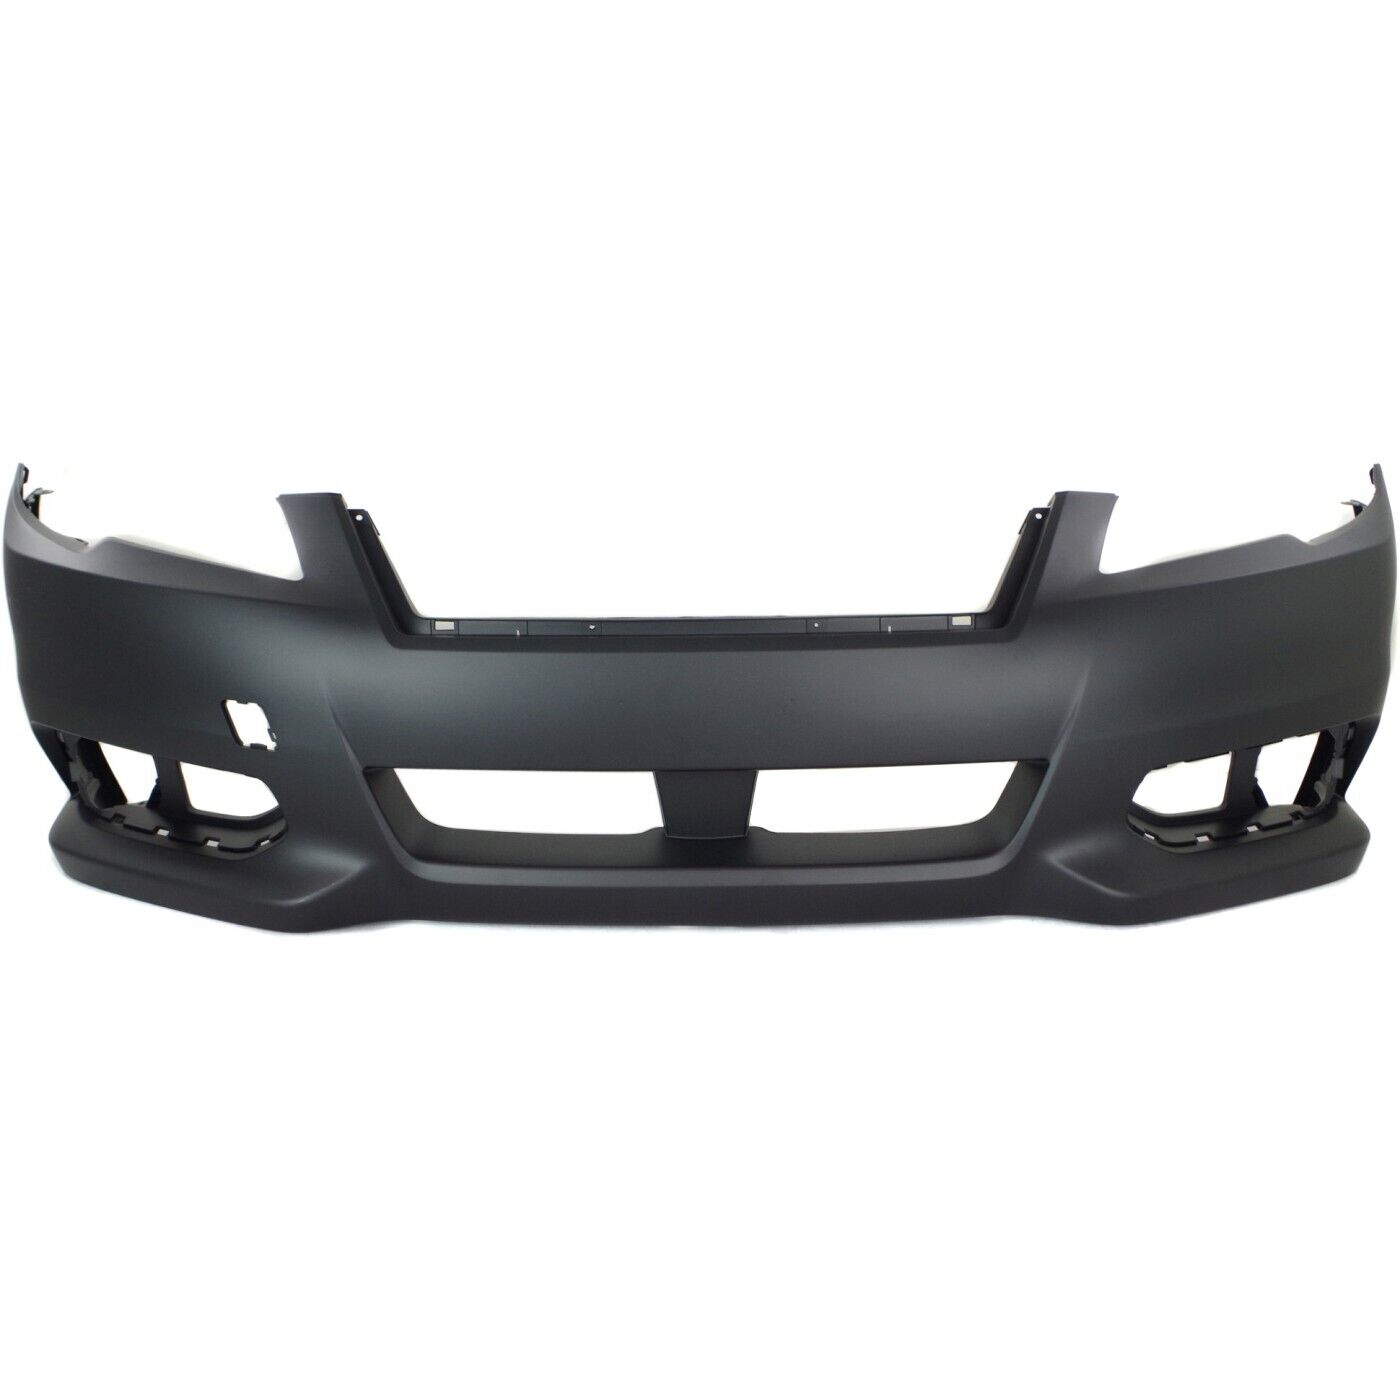 Front Bumper Cover For 2013-2014 Subaru Legacy Primed